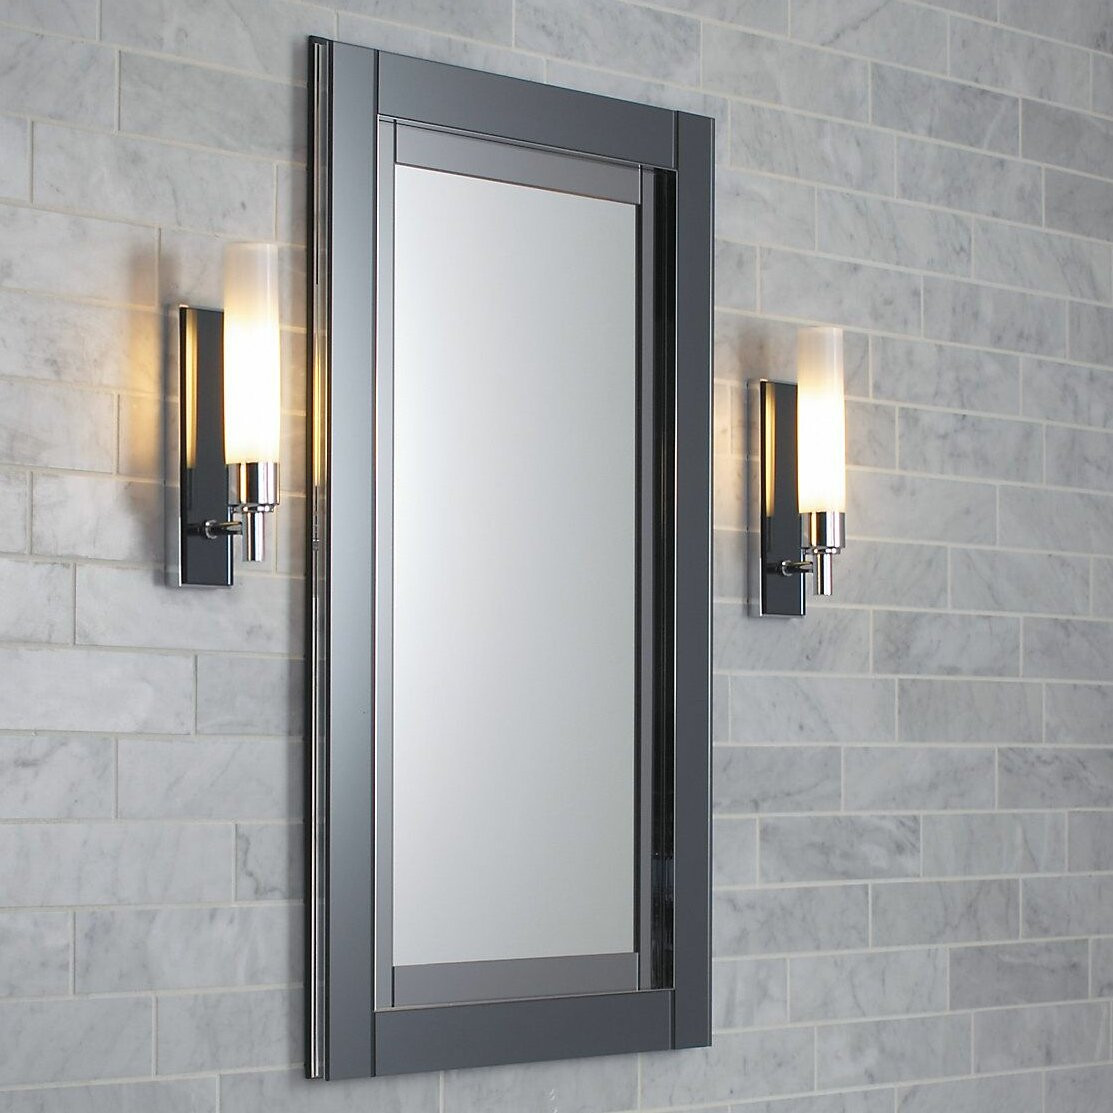 Bathroom Medicine Cabinets Recessed
 Robern Candre 20" x 30" Mirrored Recessed Electric